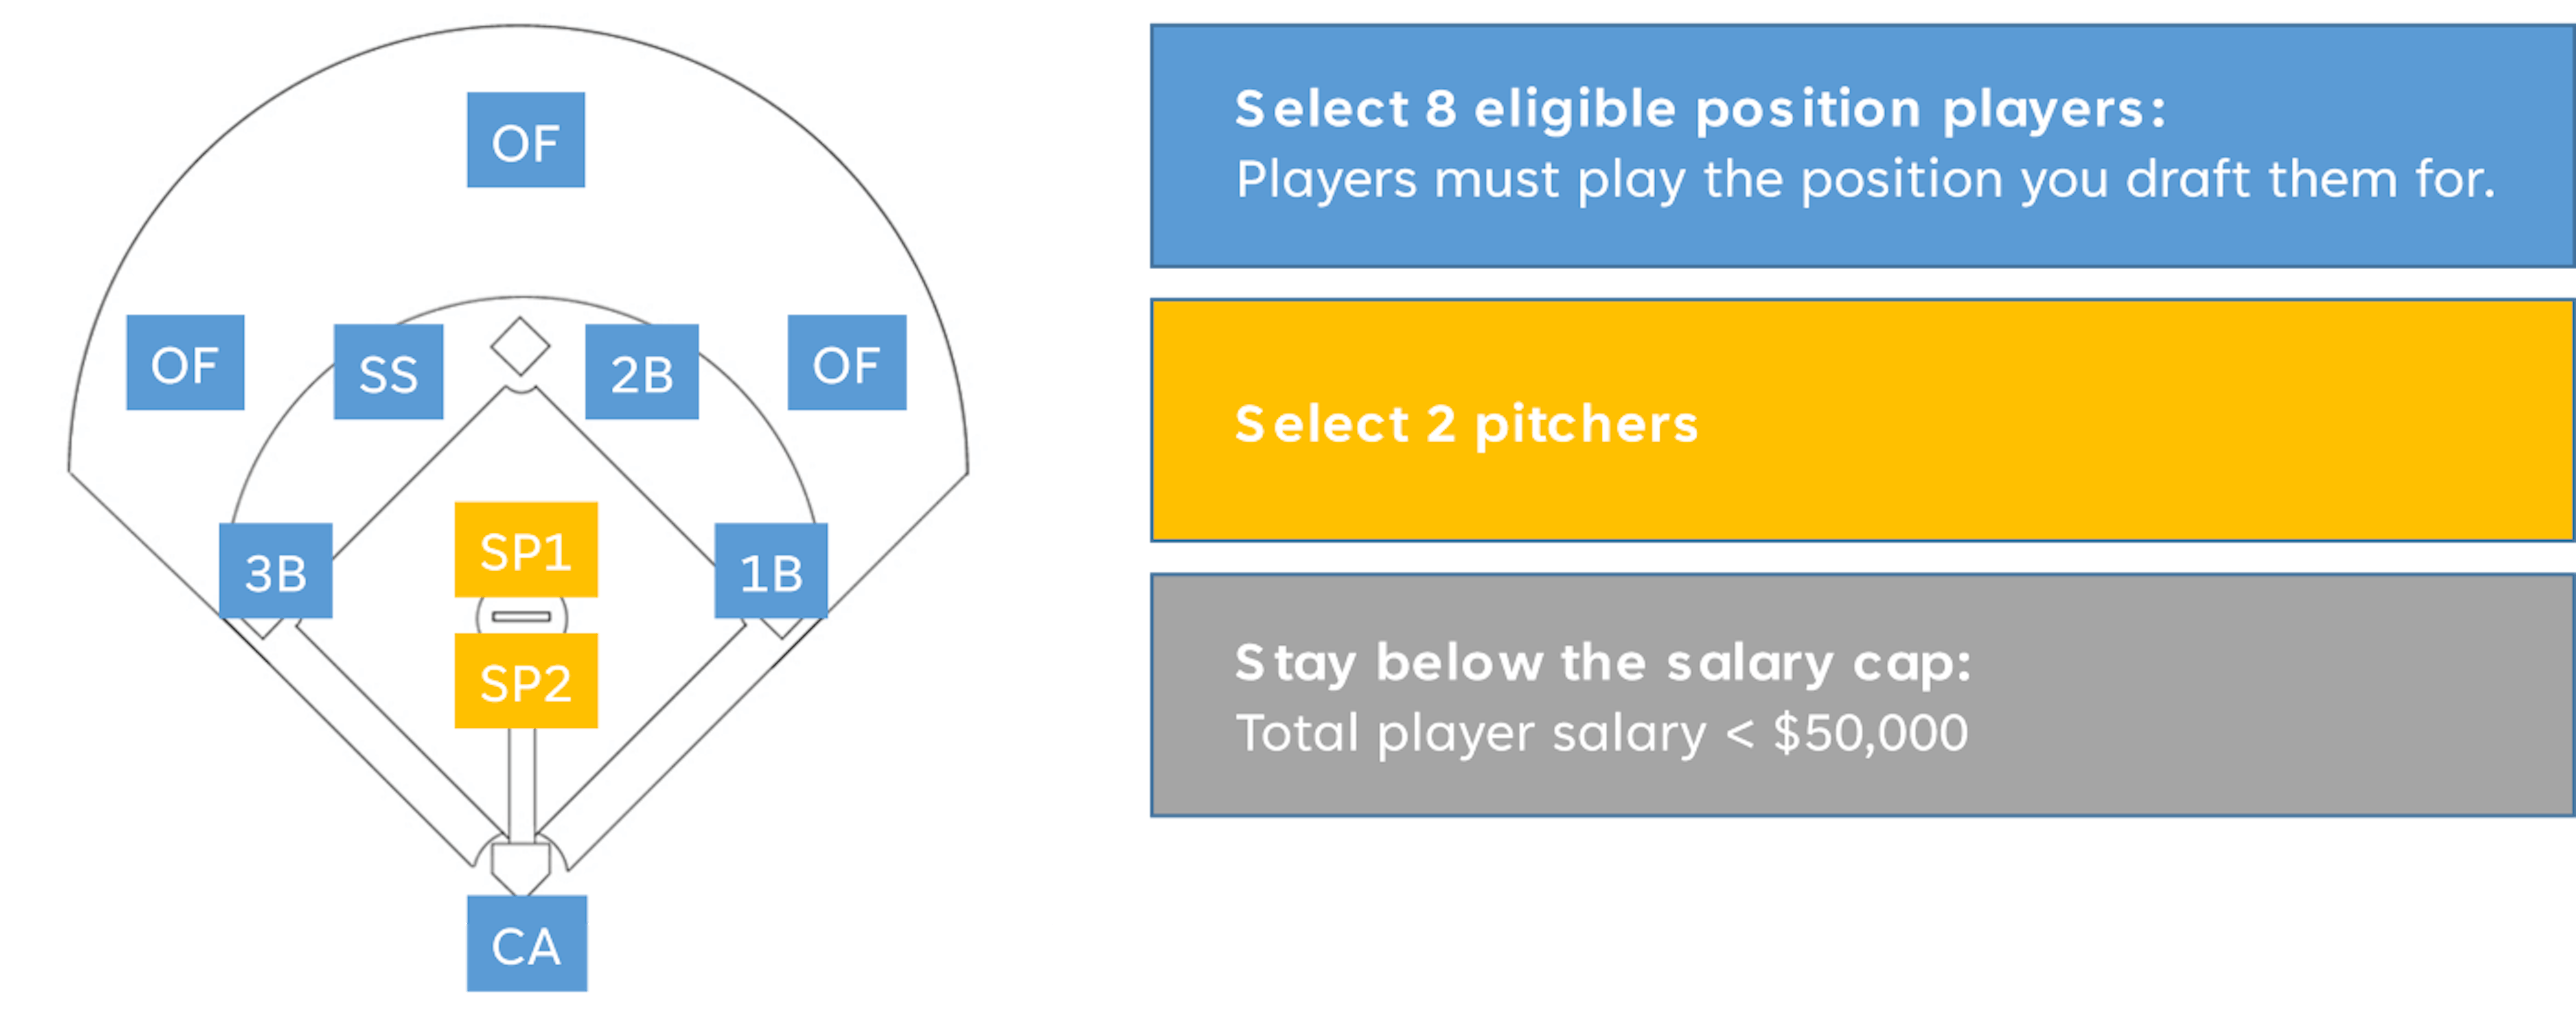 Image by author: Fantasy baseball (classic rules)